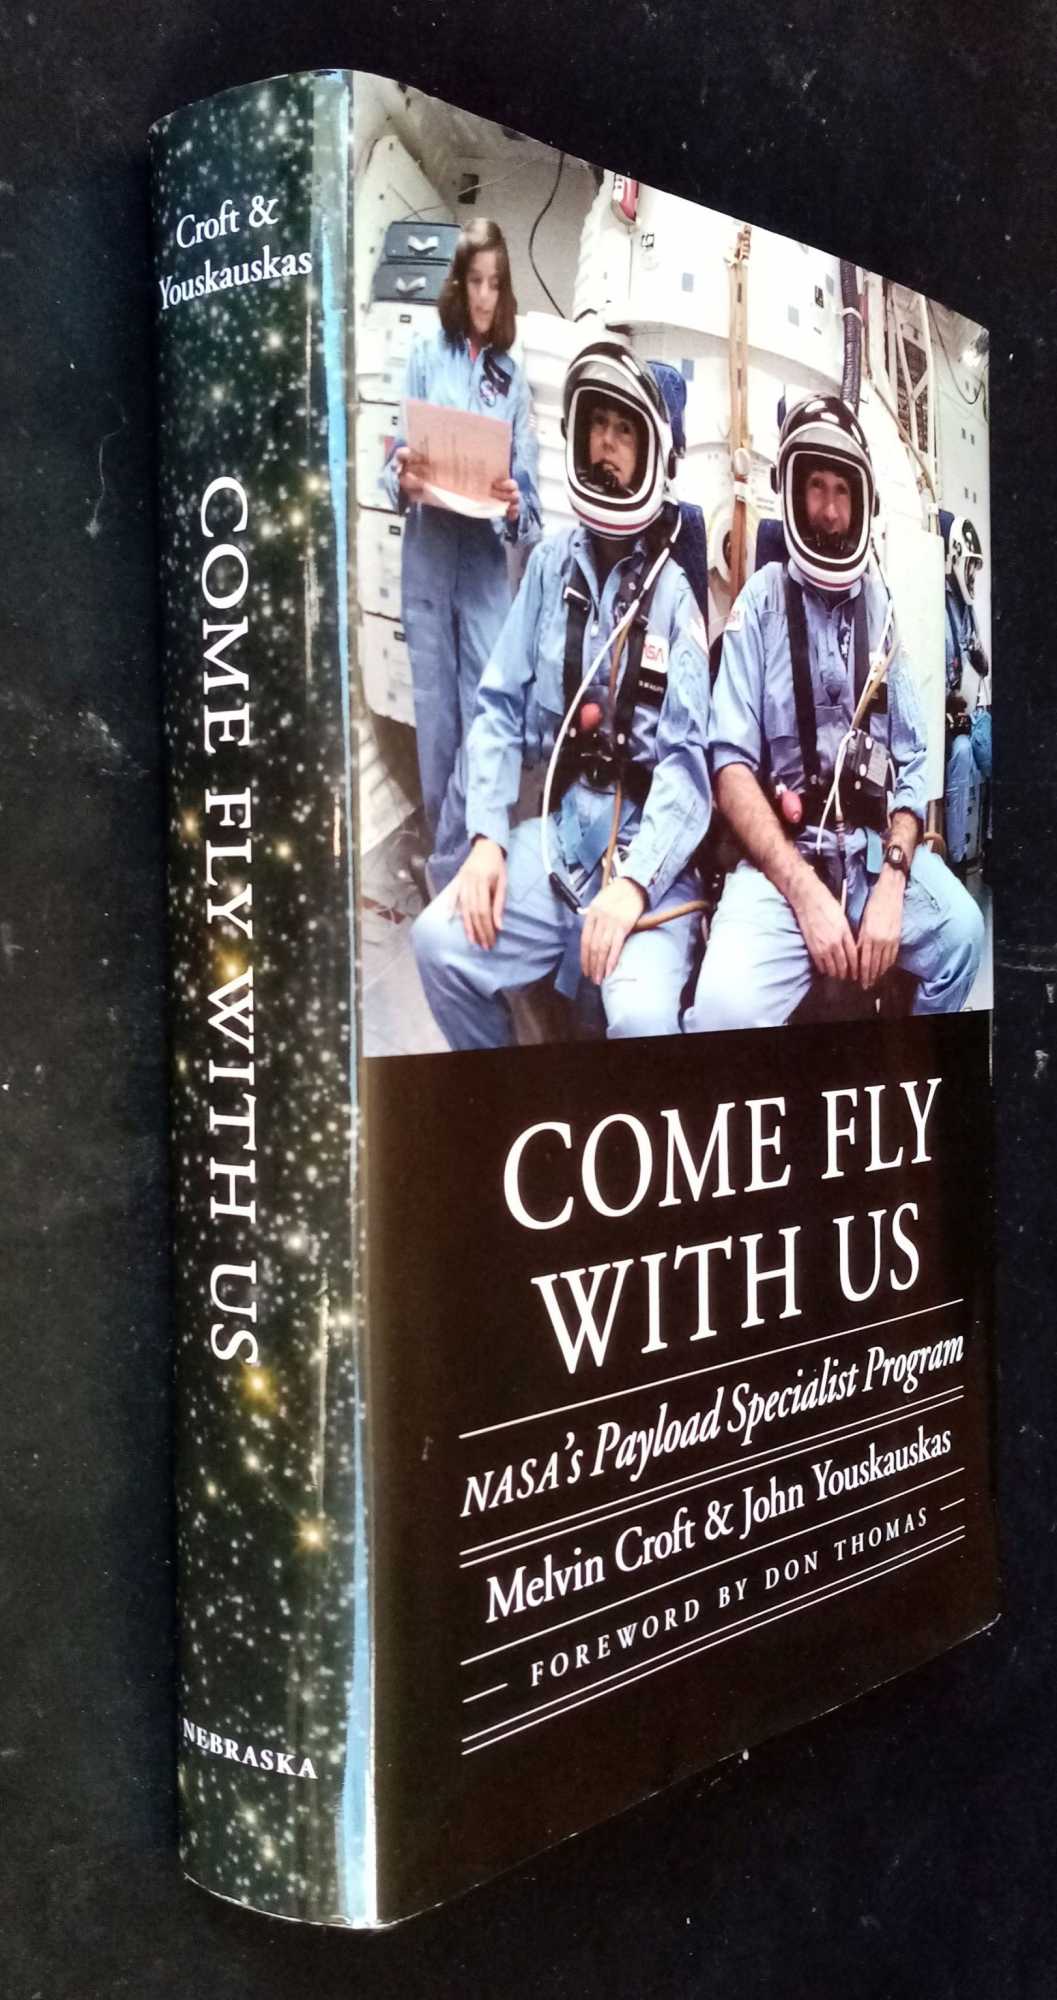 Melvin Croft, John Youskauskas - Come Fly with Us: NASAs Payload Specialist Program